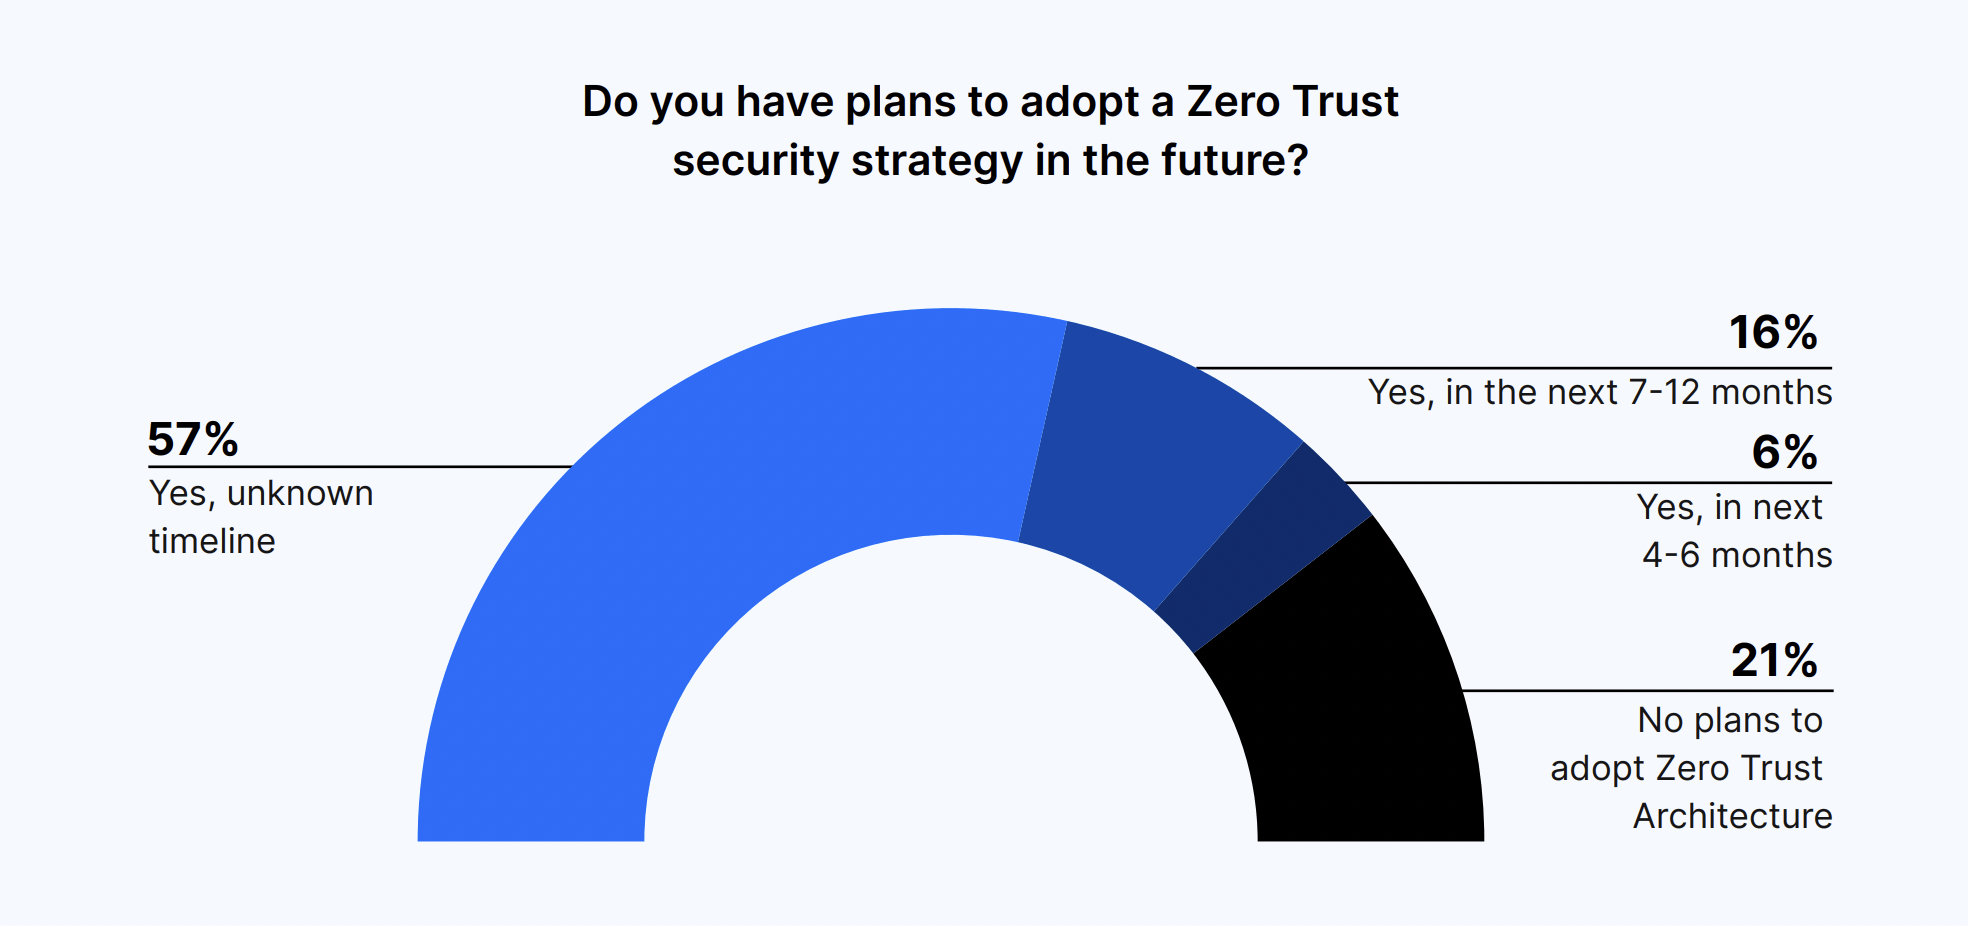 Do you have plans to adopt a Zero Trust security strategy in the future?